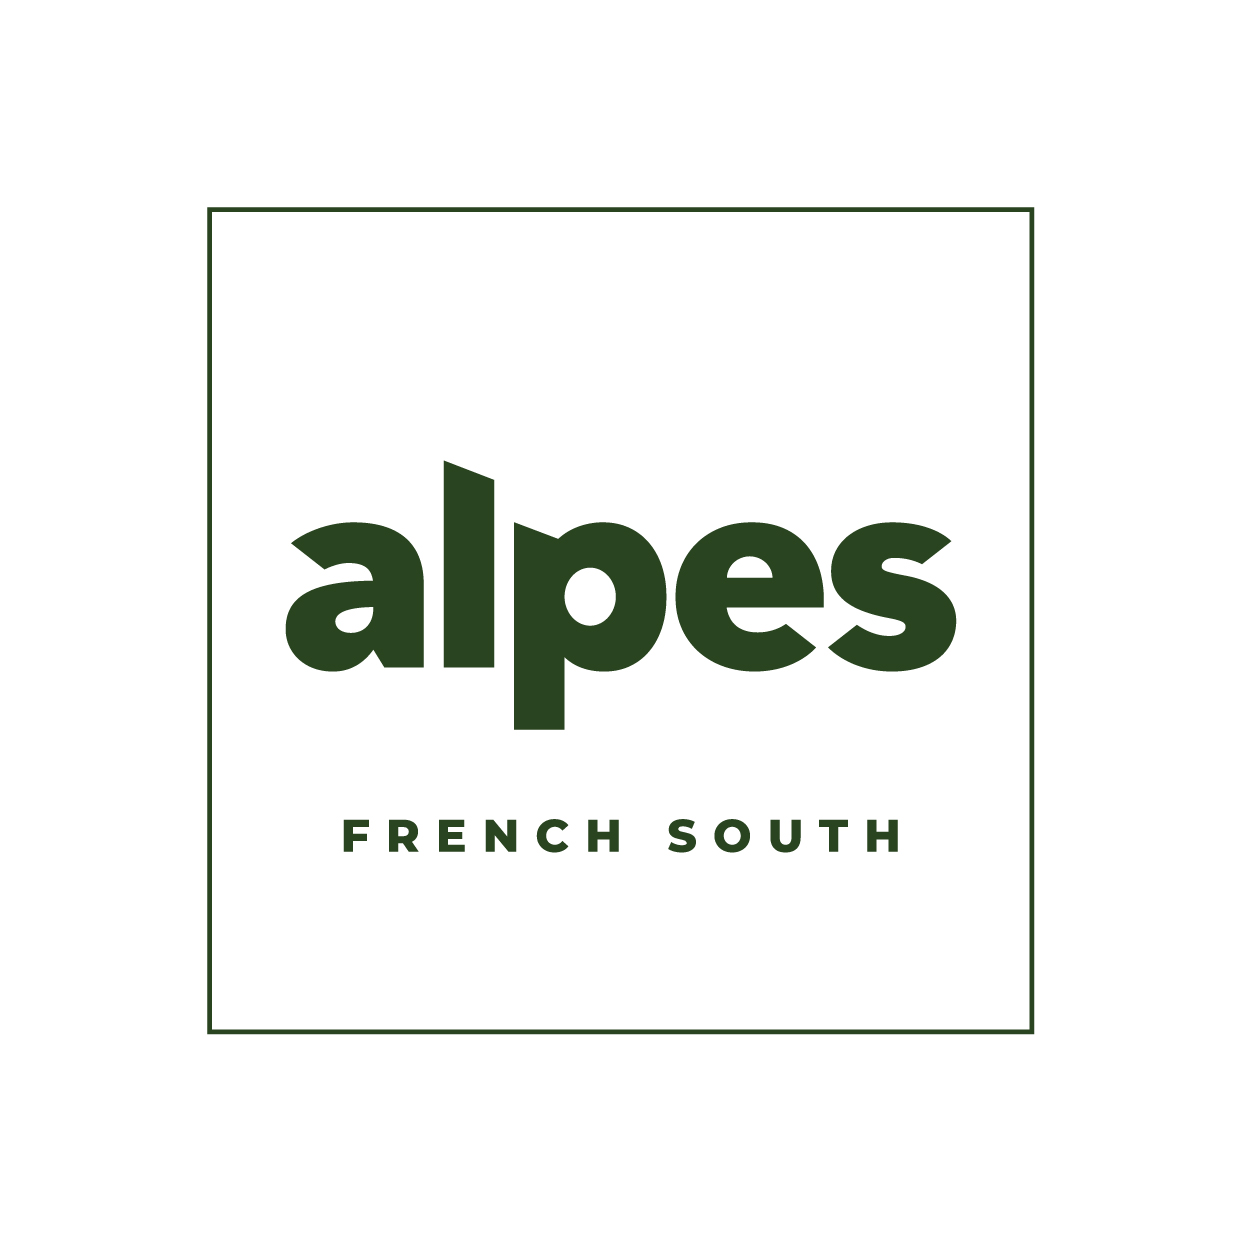 marque Alpes purealpes French South